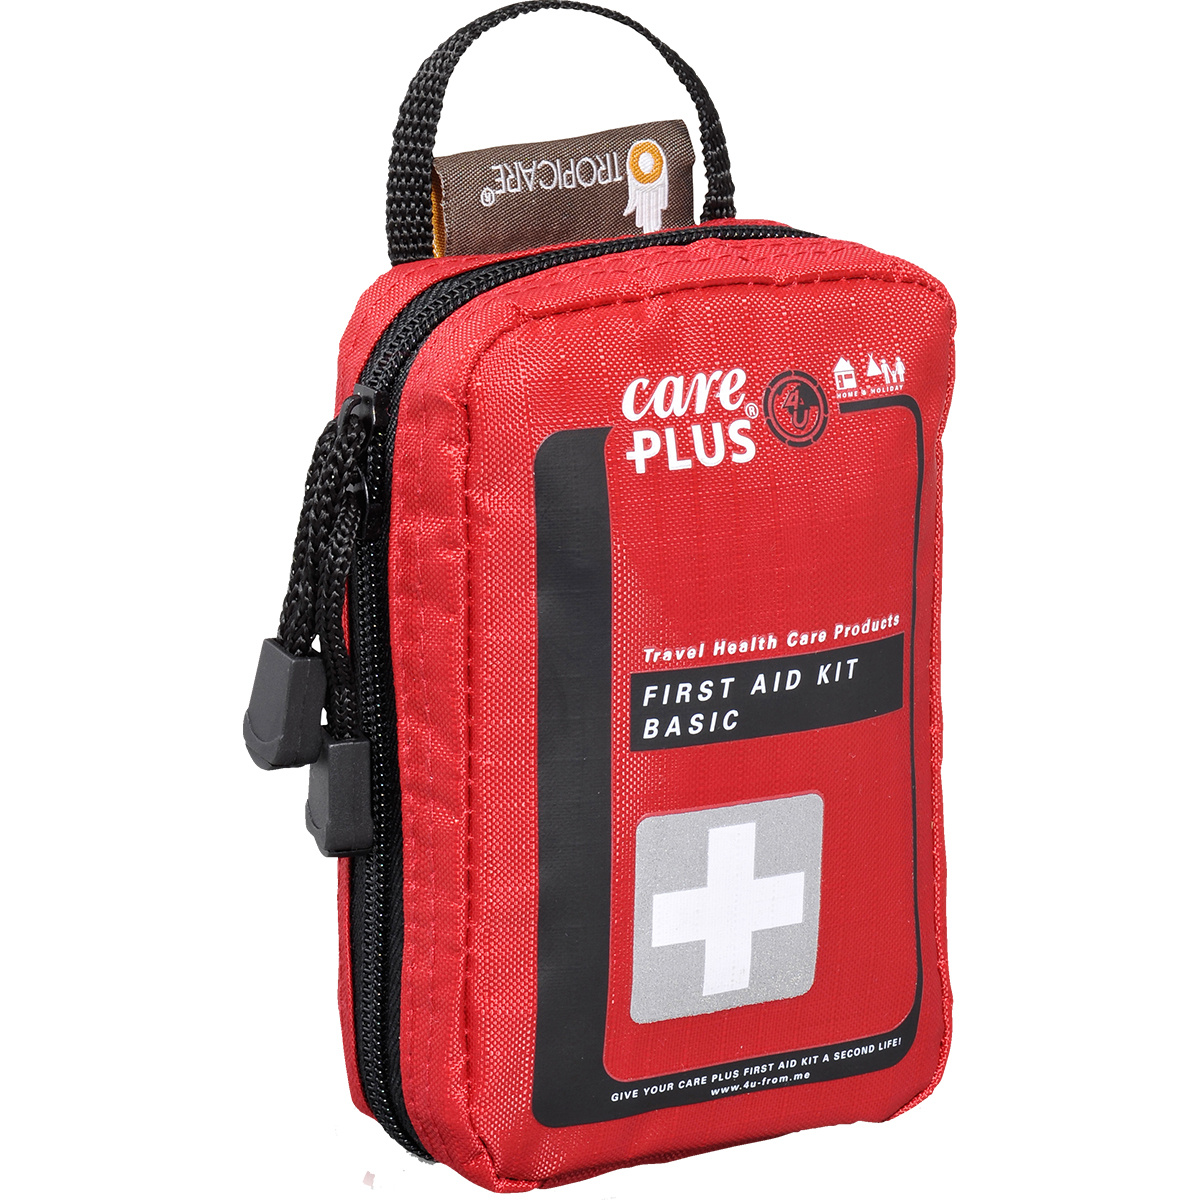 Image of Care Plus First Aid Kit Bacis